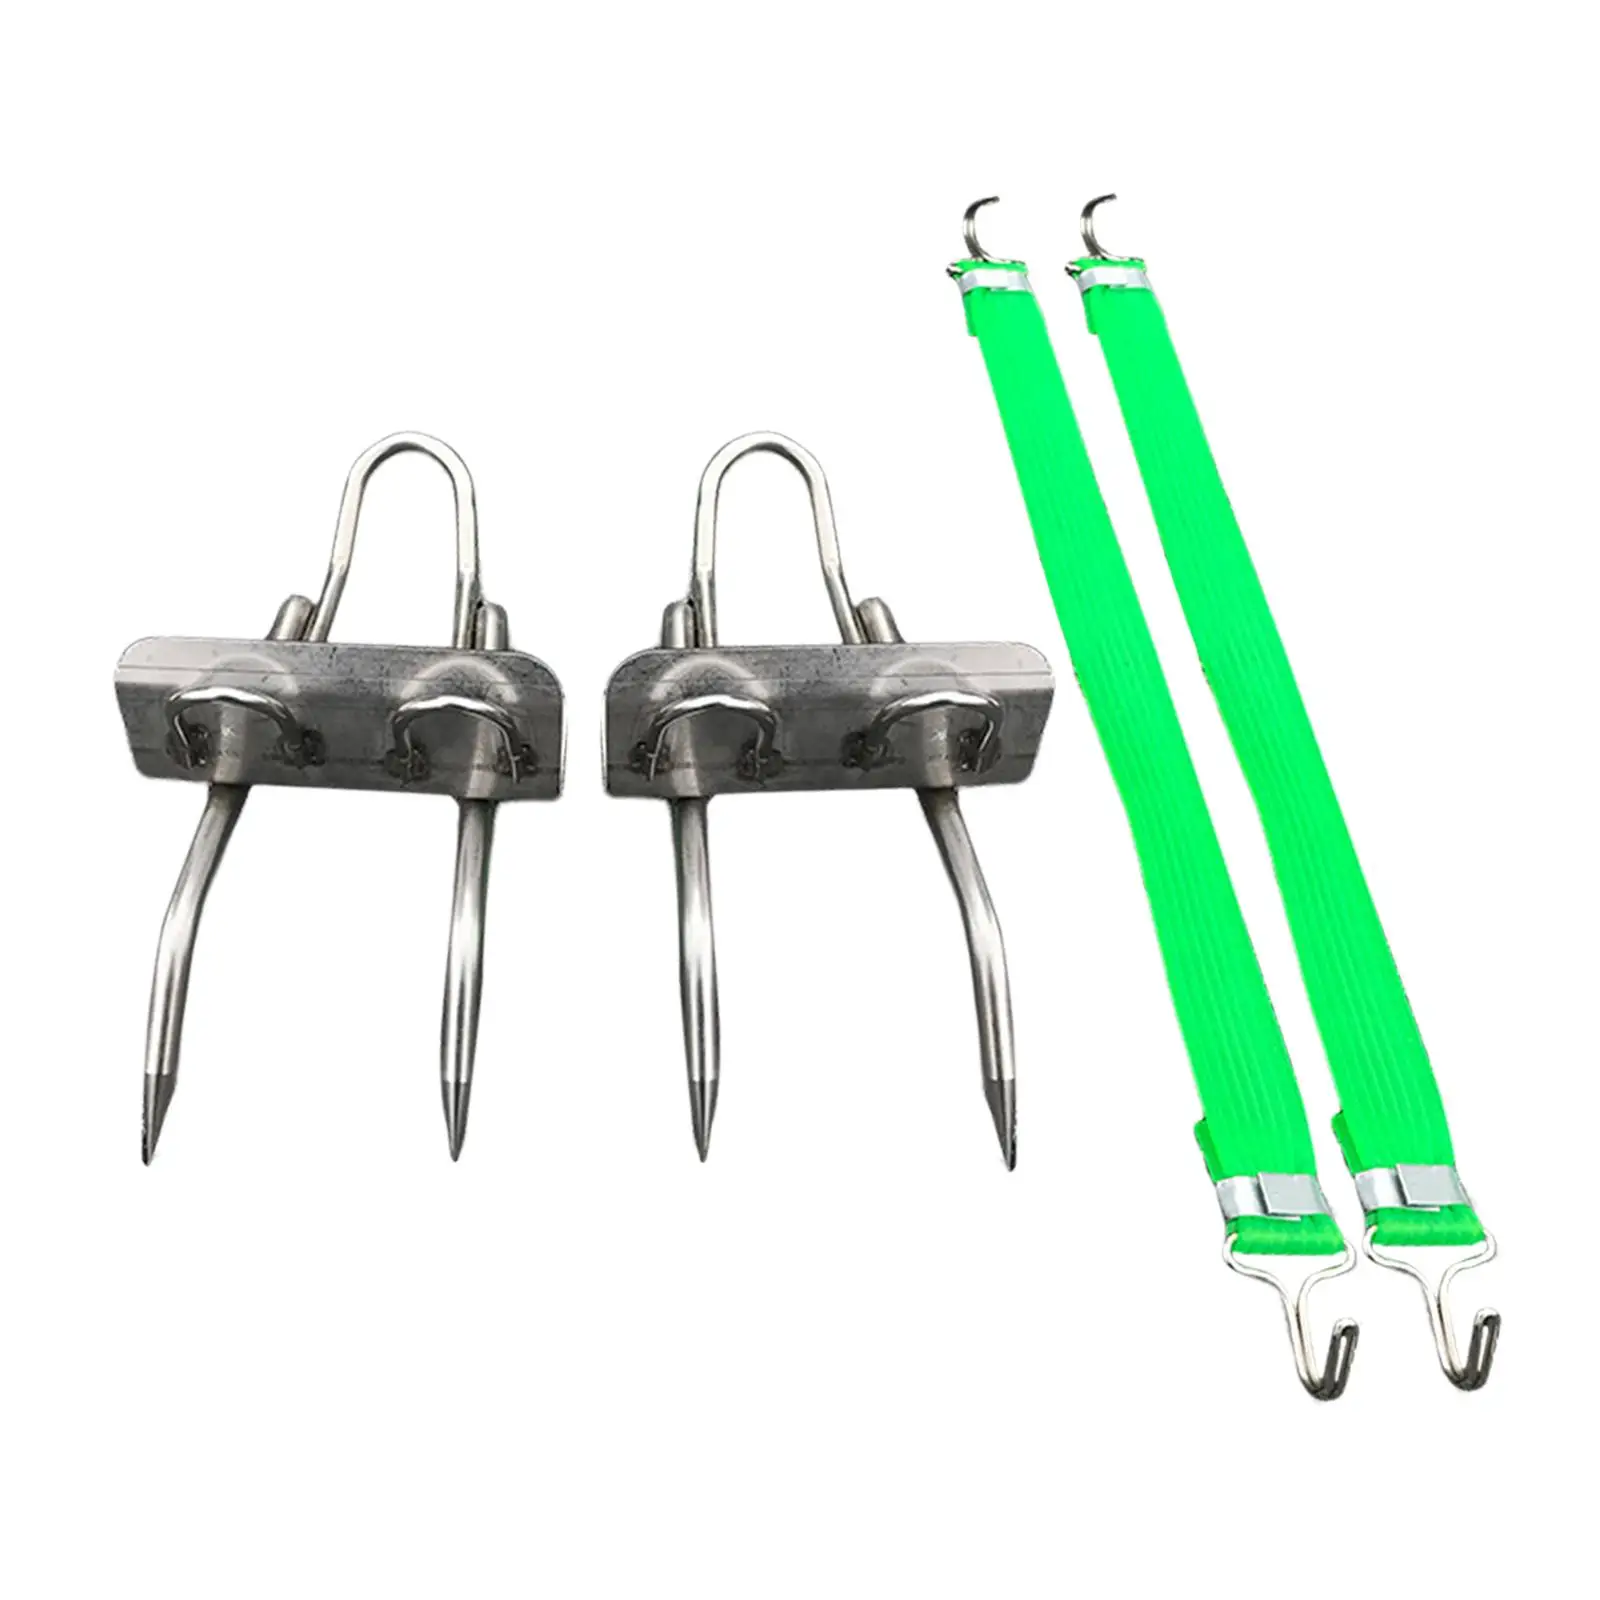 

2 Pcs Tree Climbing Spikes Professional Wear Resistant Steel Gear Steady Durable for Climber Picking Fruit Outdoor Camping